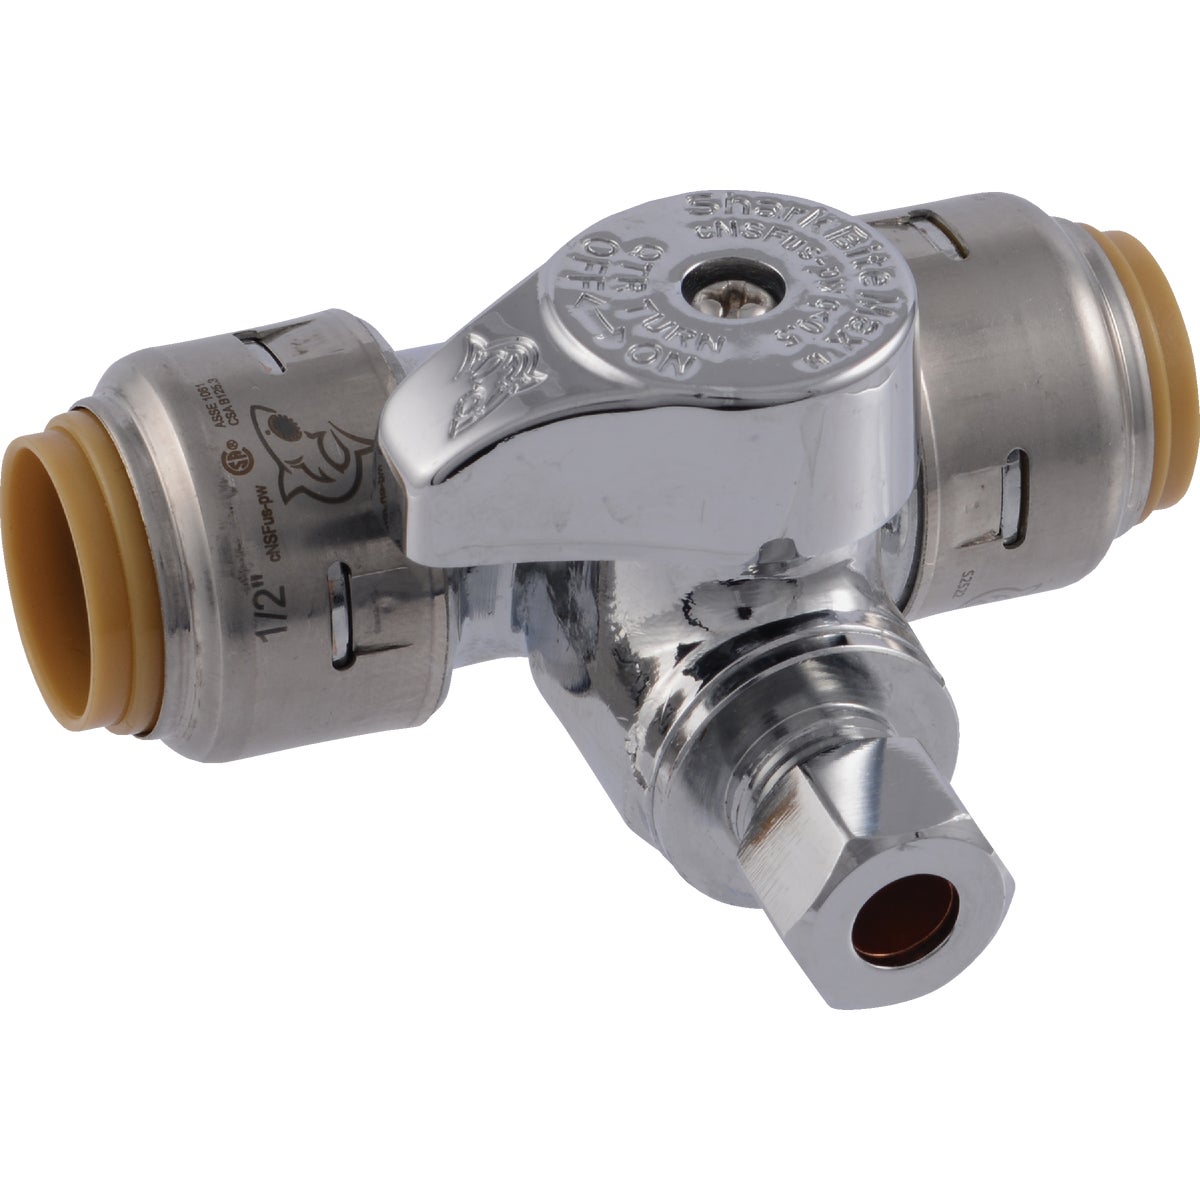 Item 404611, SharkBite Max push-to-connect fittings allow you make pipe connections with